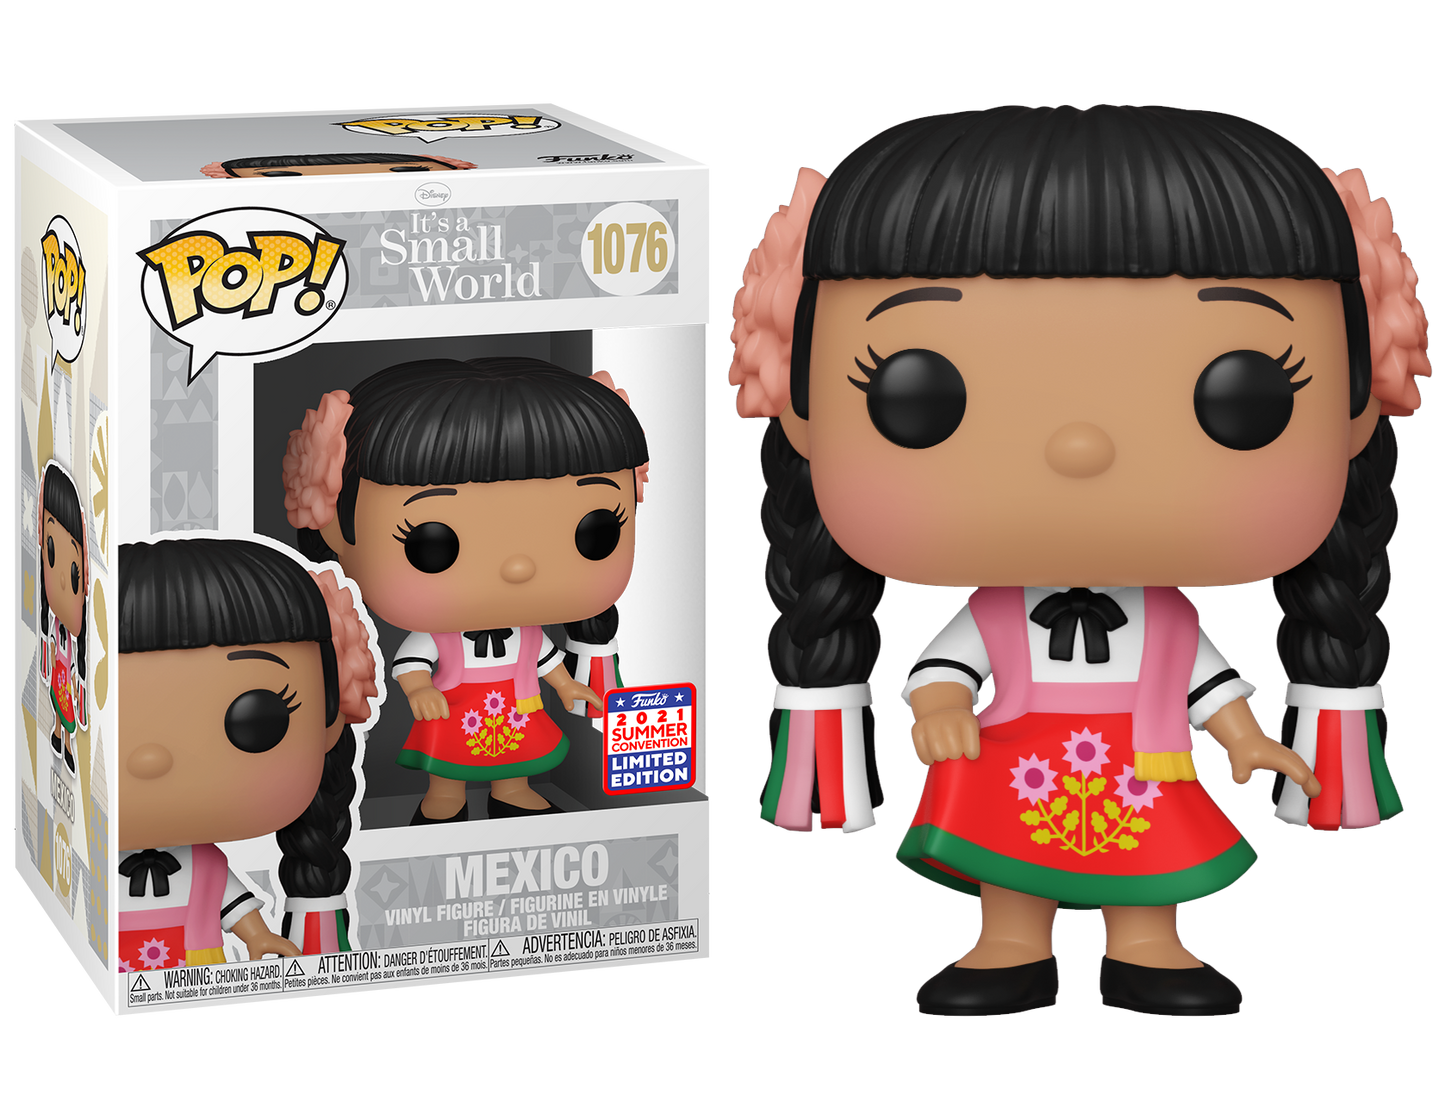 Disney - It’s a Small World Mexico 2021 Summer Convention Exclusive Pop! Vinyl